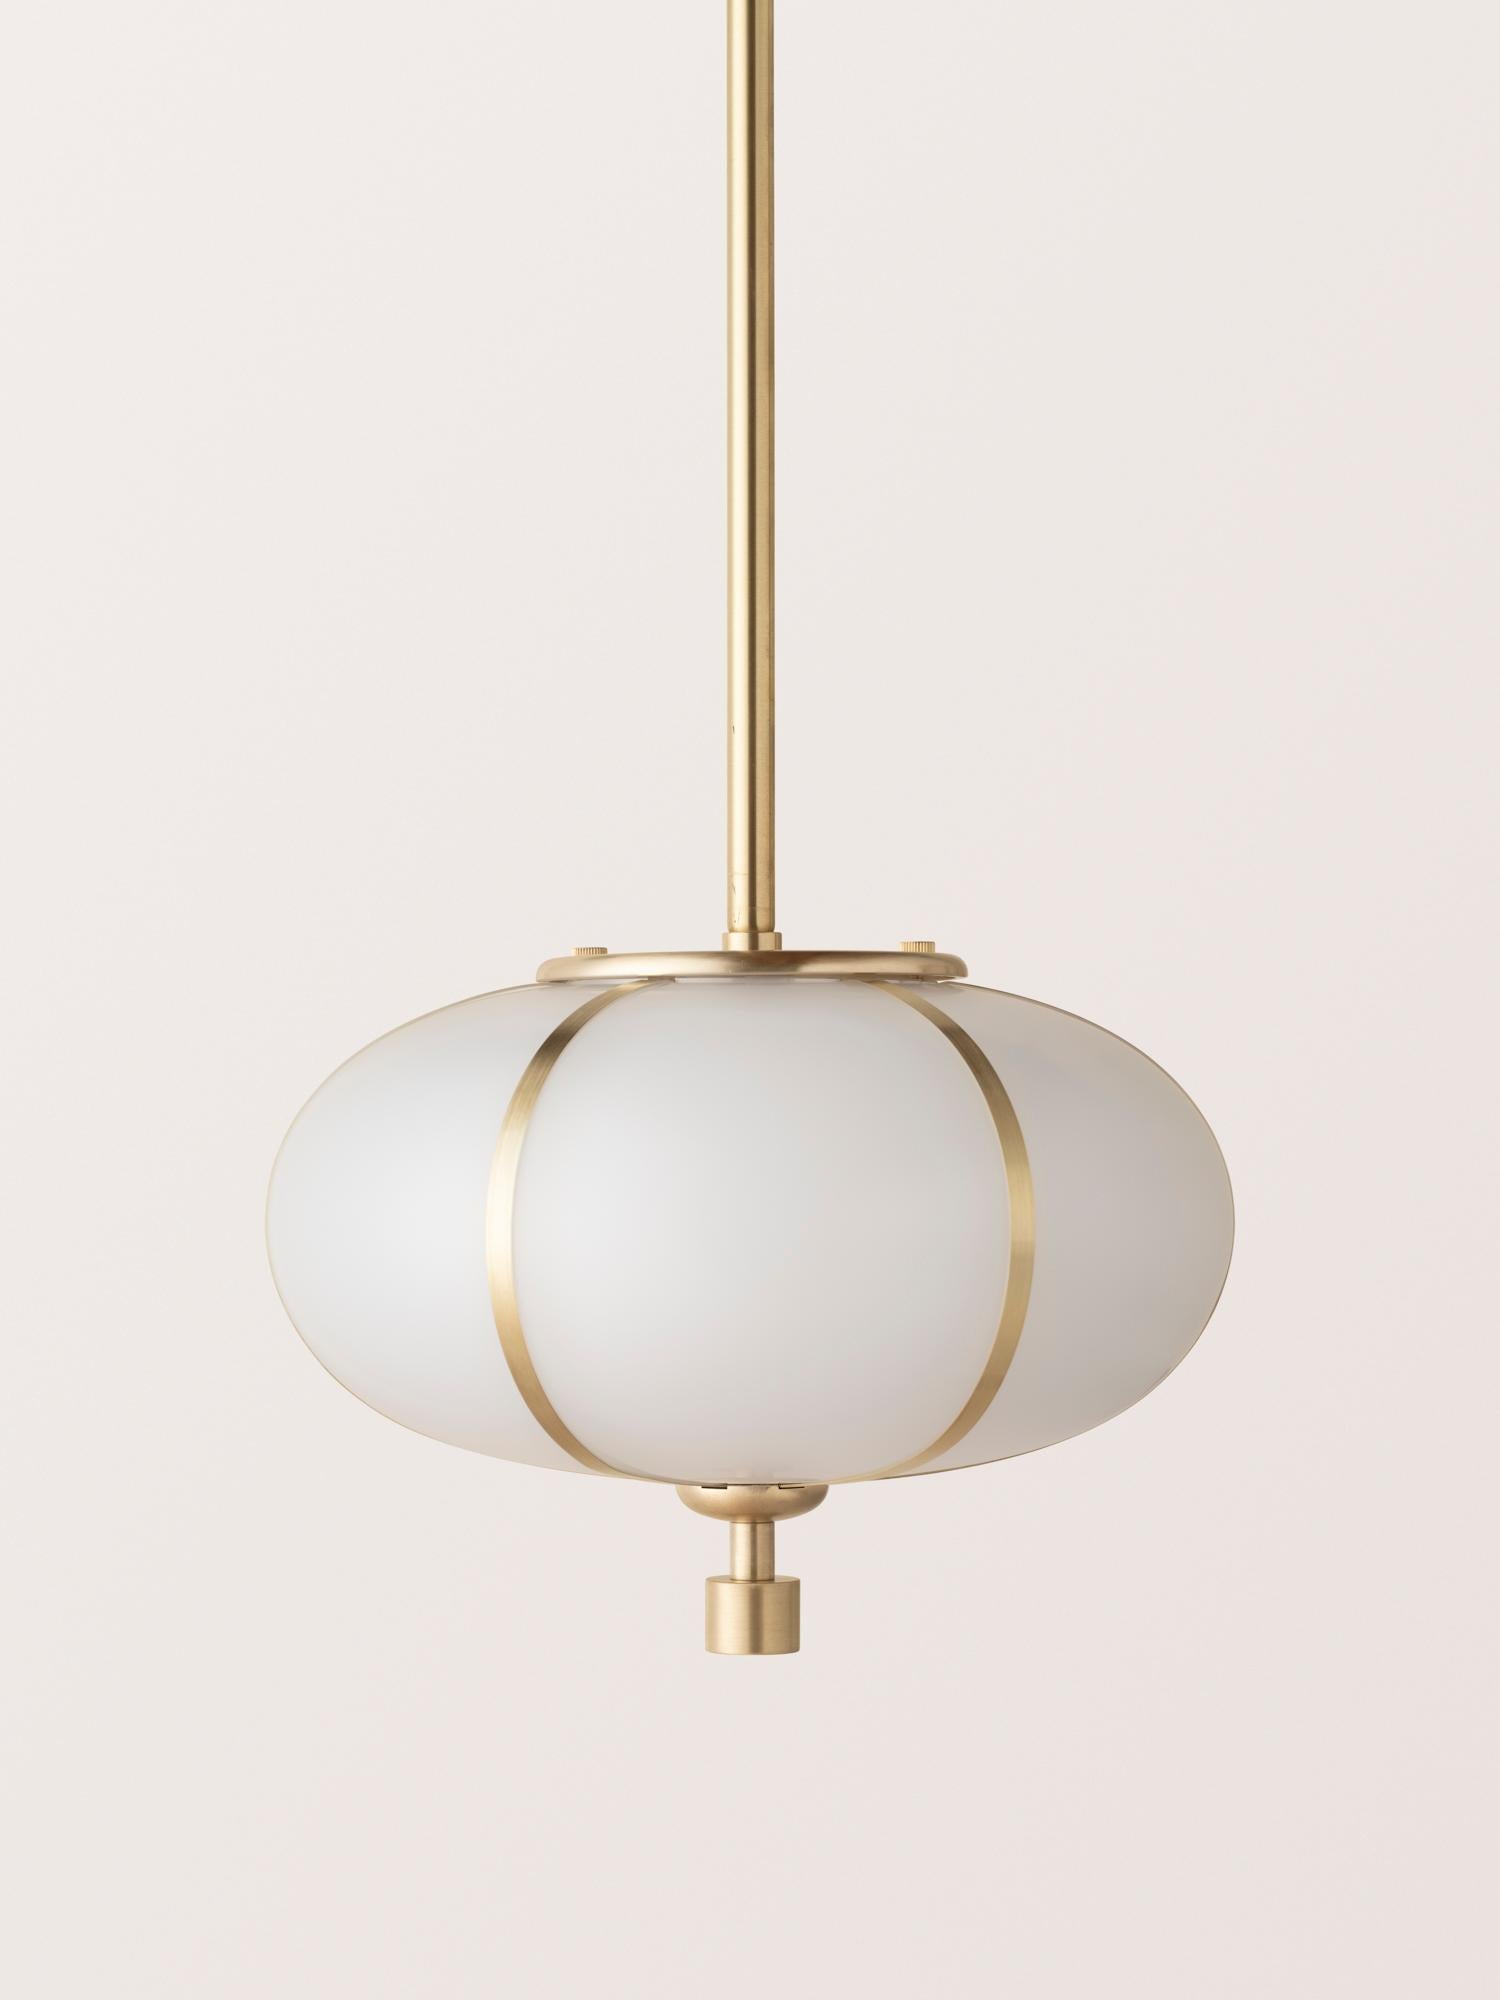 Rib Pendant - Small Ellipse in Satin Brass In New Condition For Sale In New York, NY